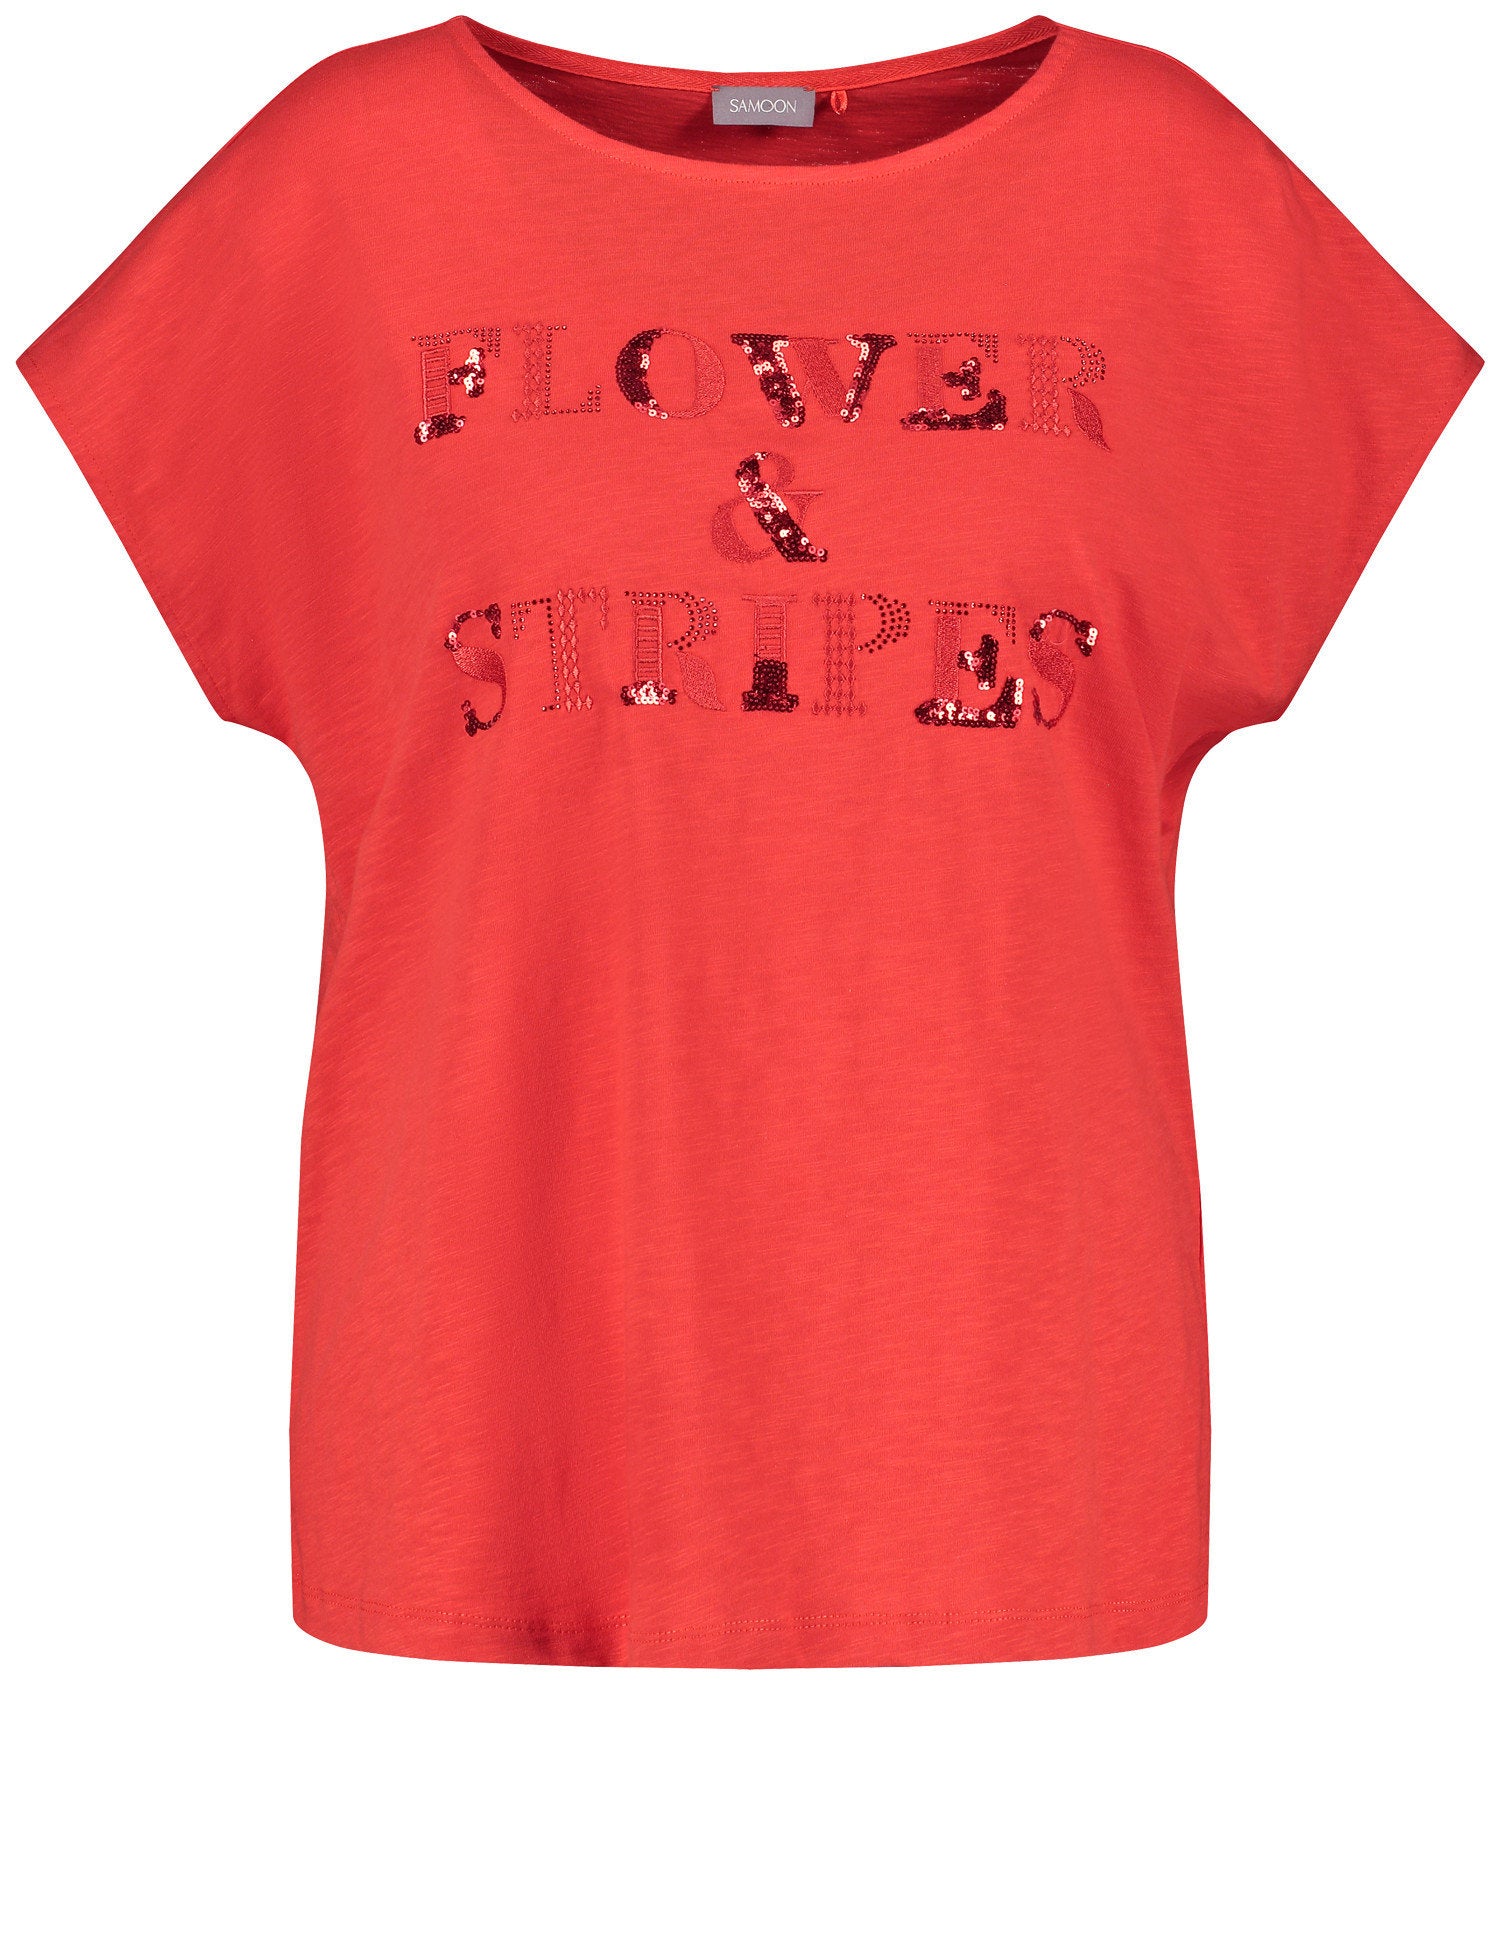 T-Shirt With Decorative Lettering_471028-26123_6382_06